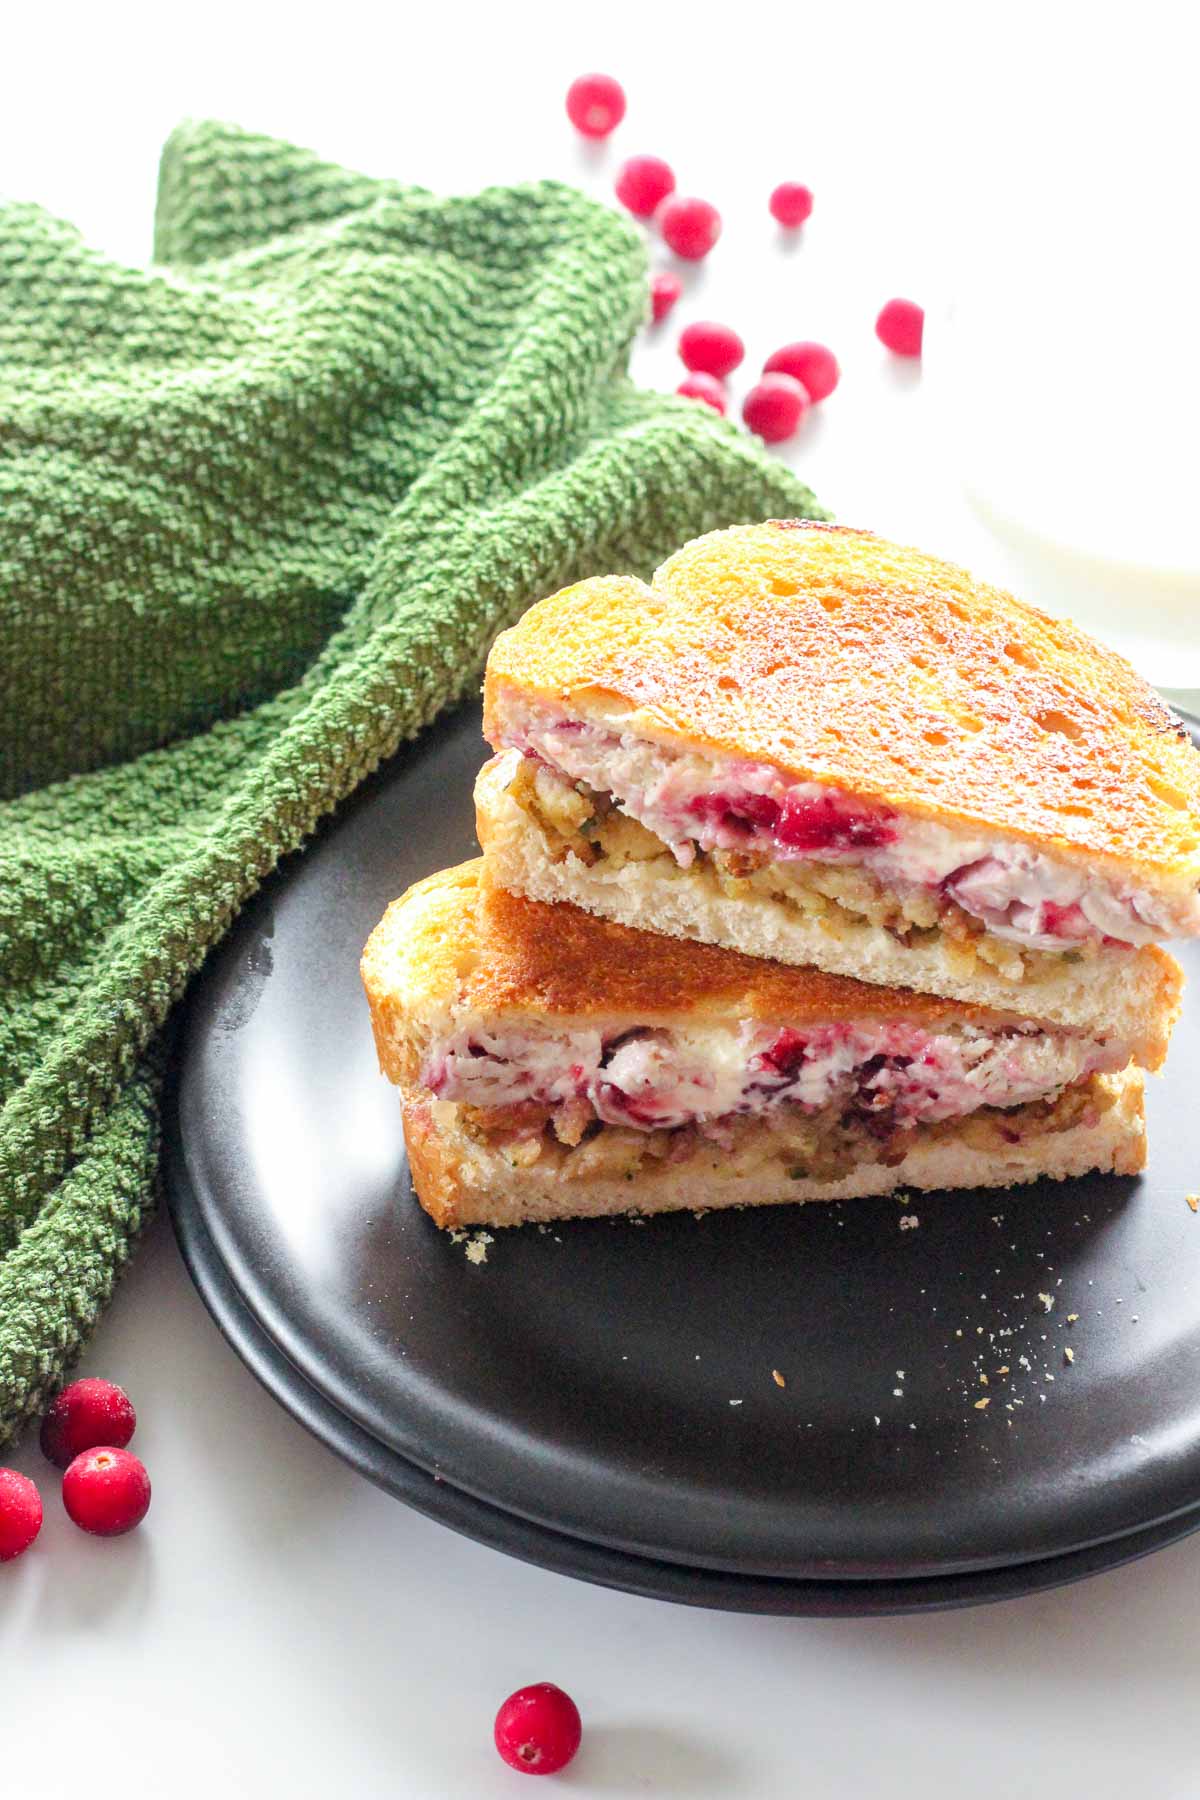 Two halves of a grilled cream cheese cranberry turkey sandwich, stacked on a black plate.